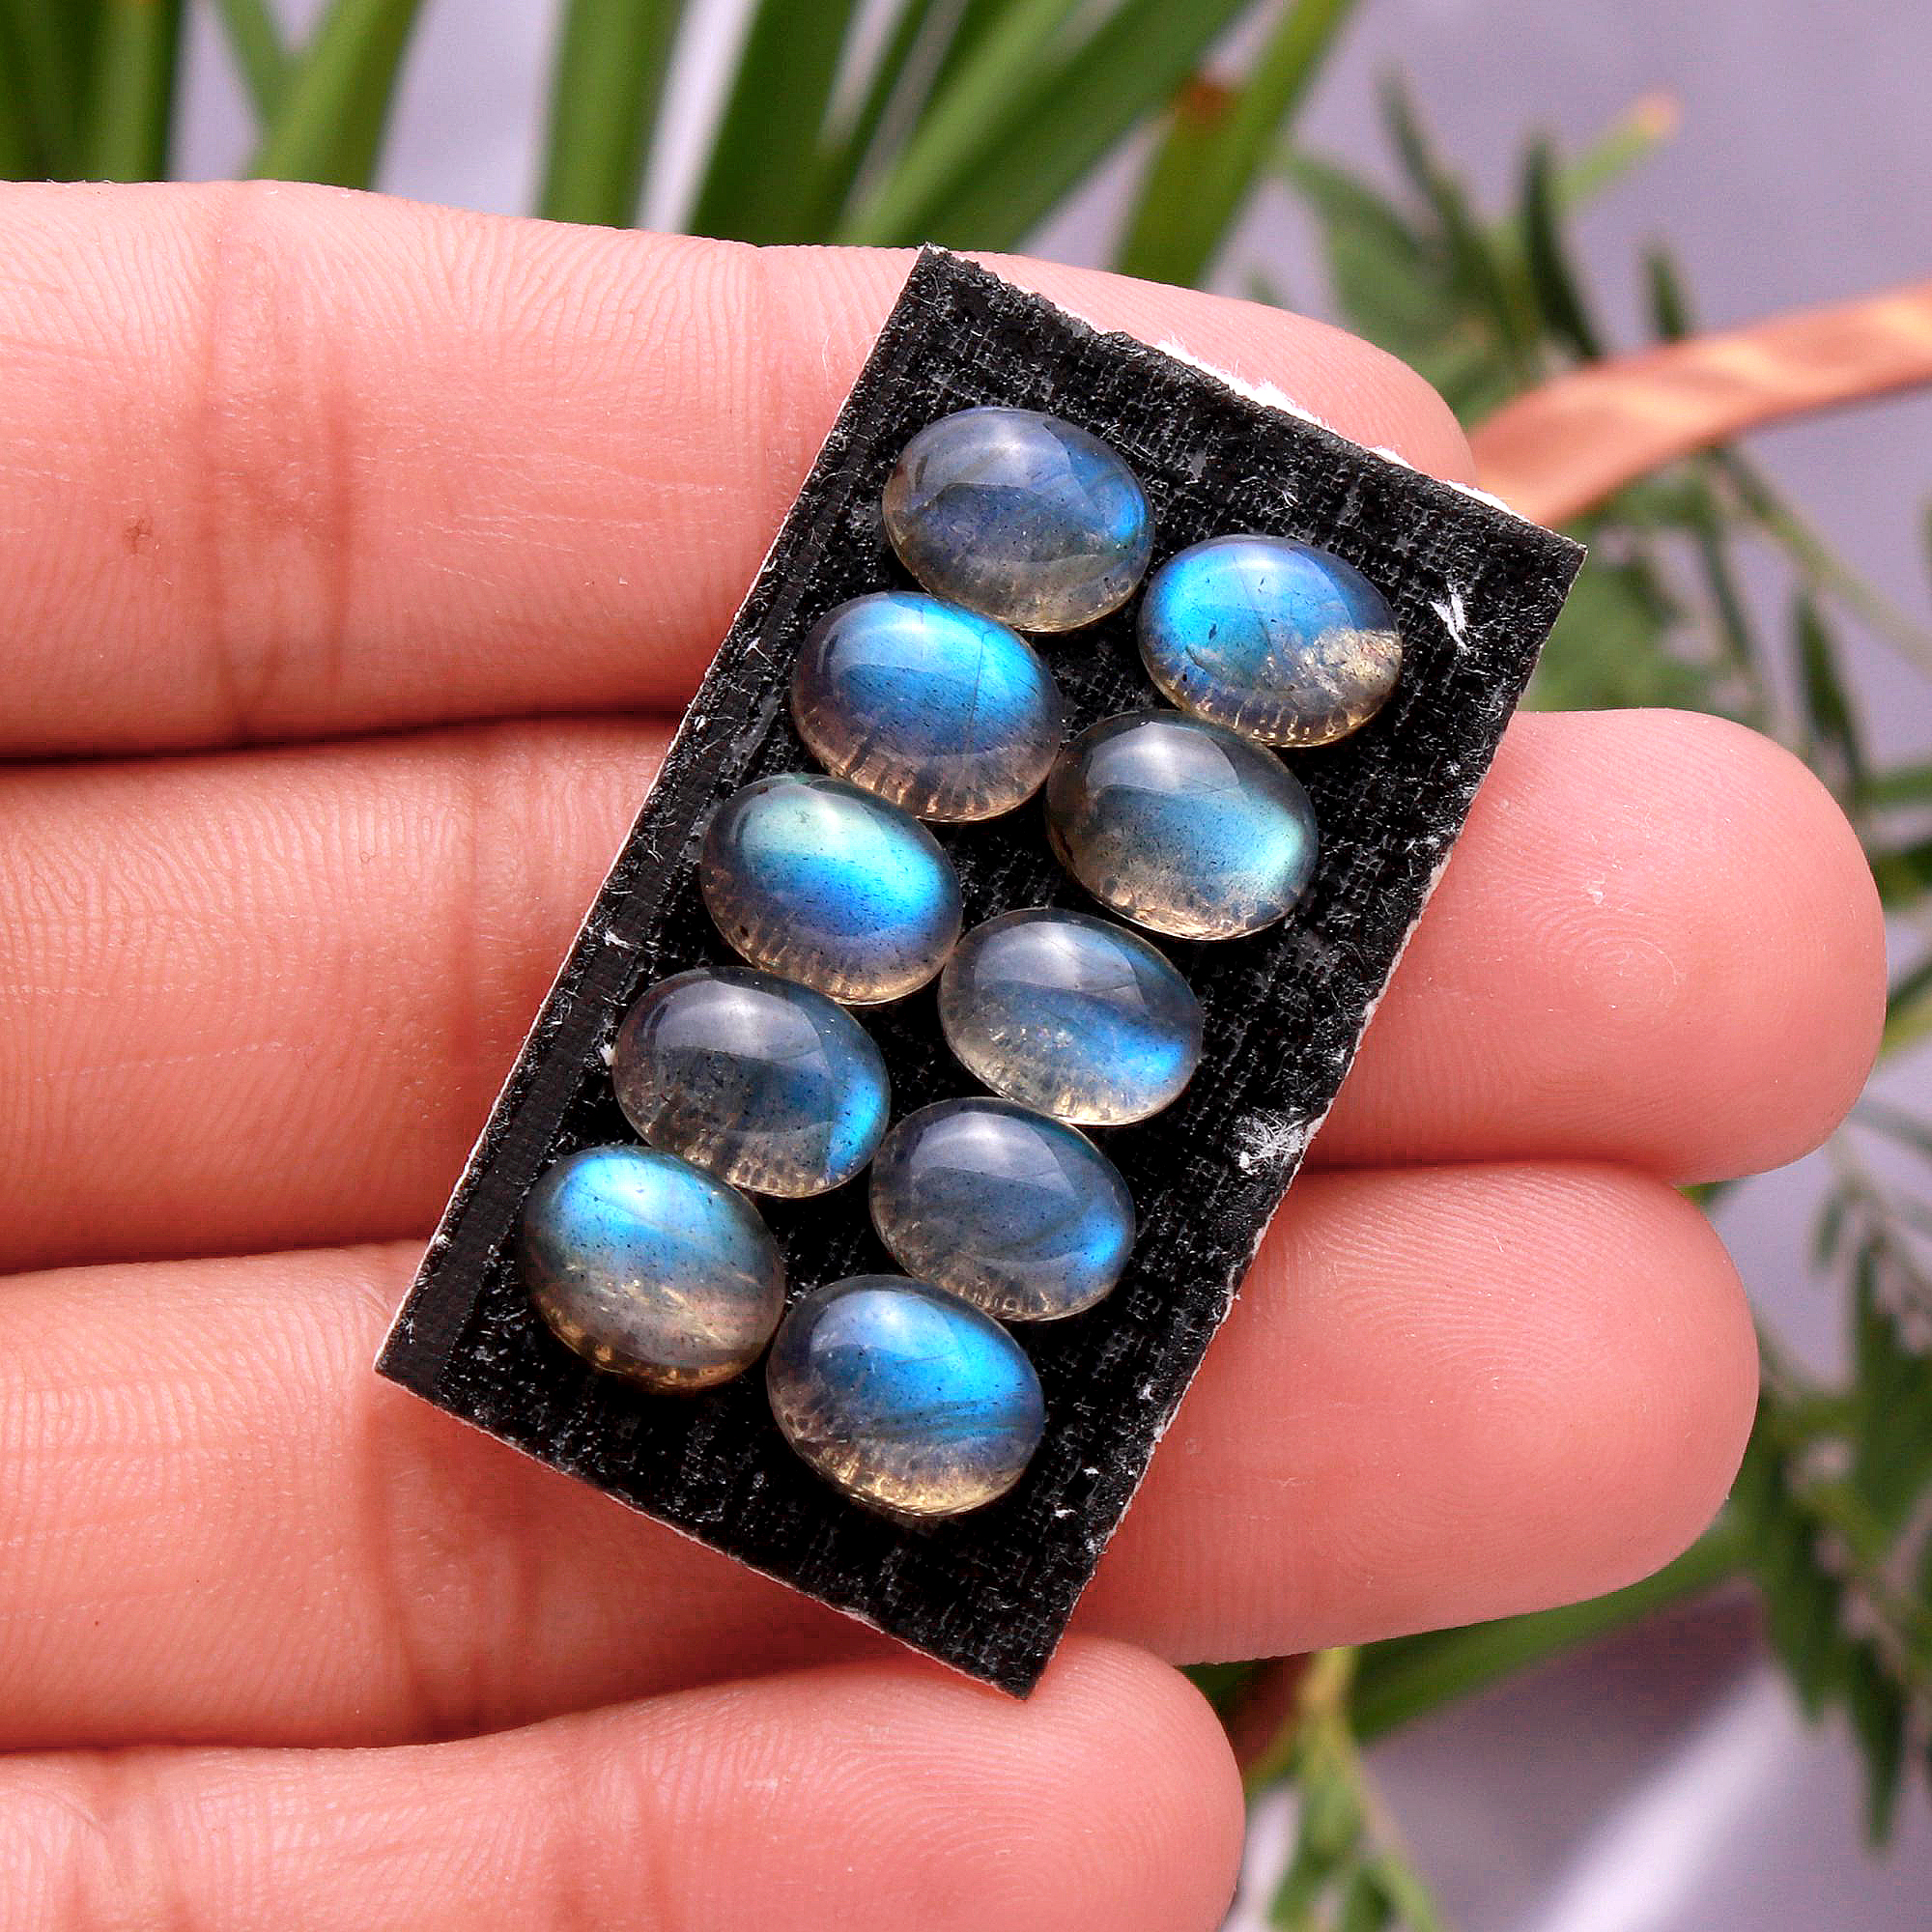 10 Pcs 23.10 Cts Natural Celibrated Labradorite Oval Cabochons Loose Gemstone Wholesale Lot Size 9x7mm